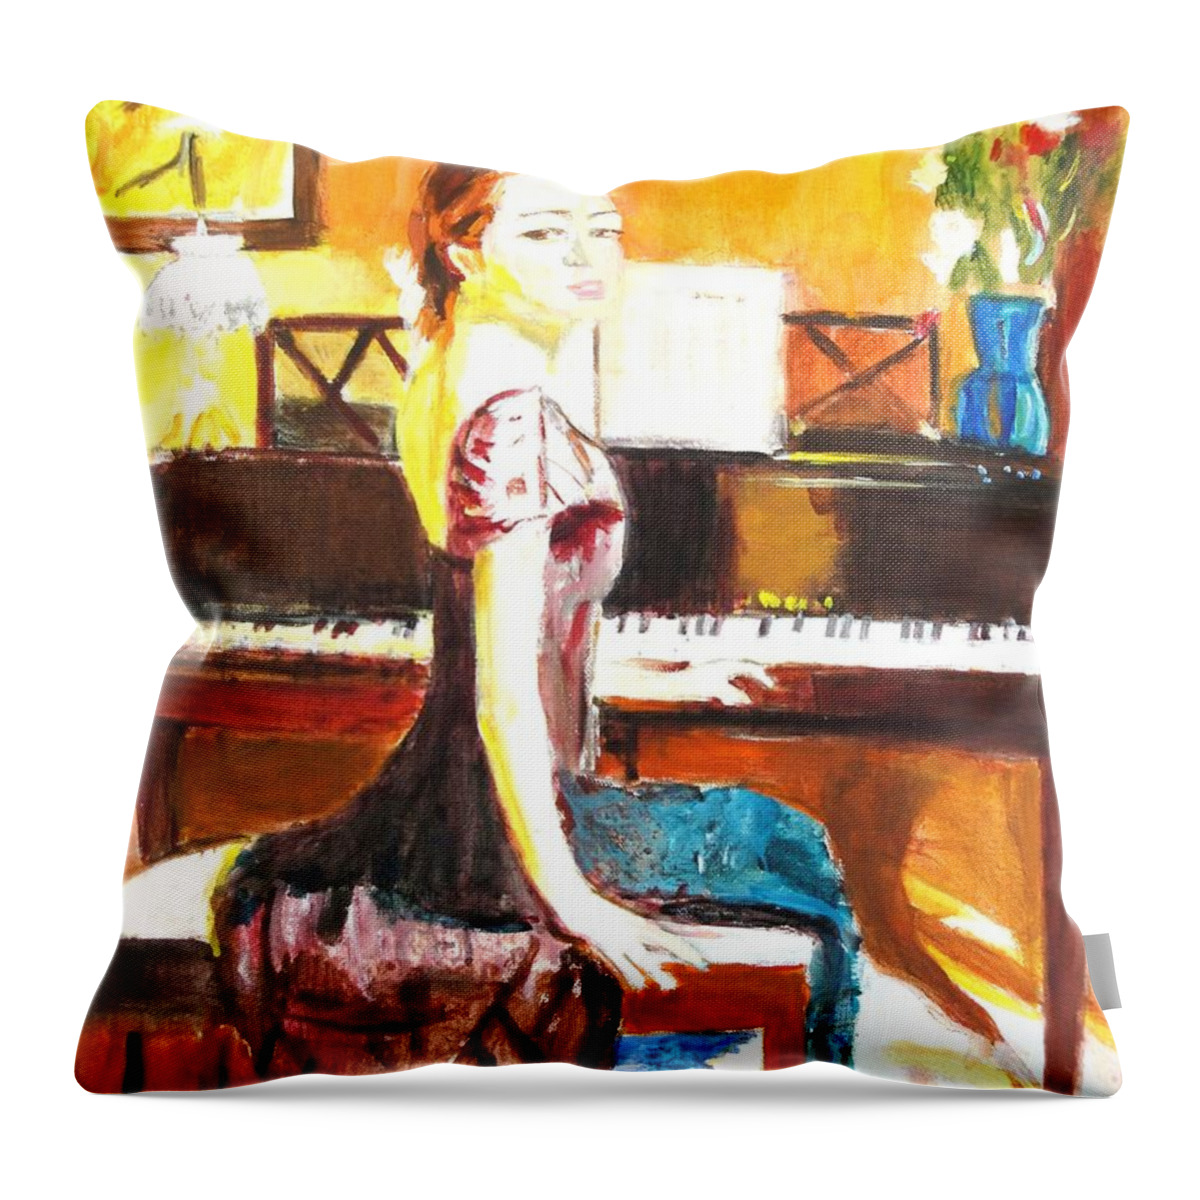 Piano Throw Pillow featuring the painting Impromptu by Judy Kay